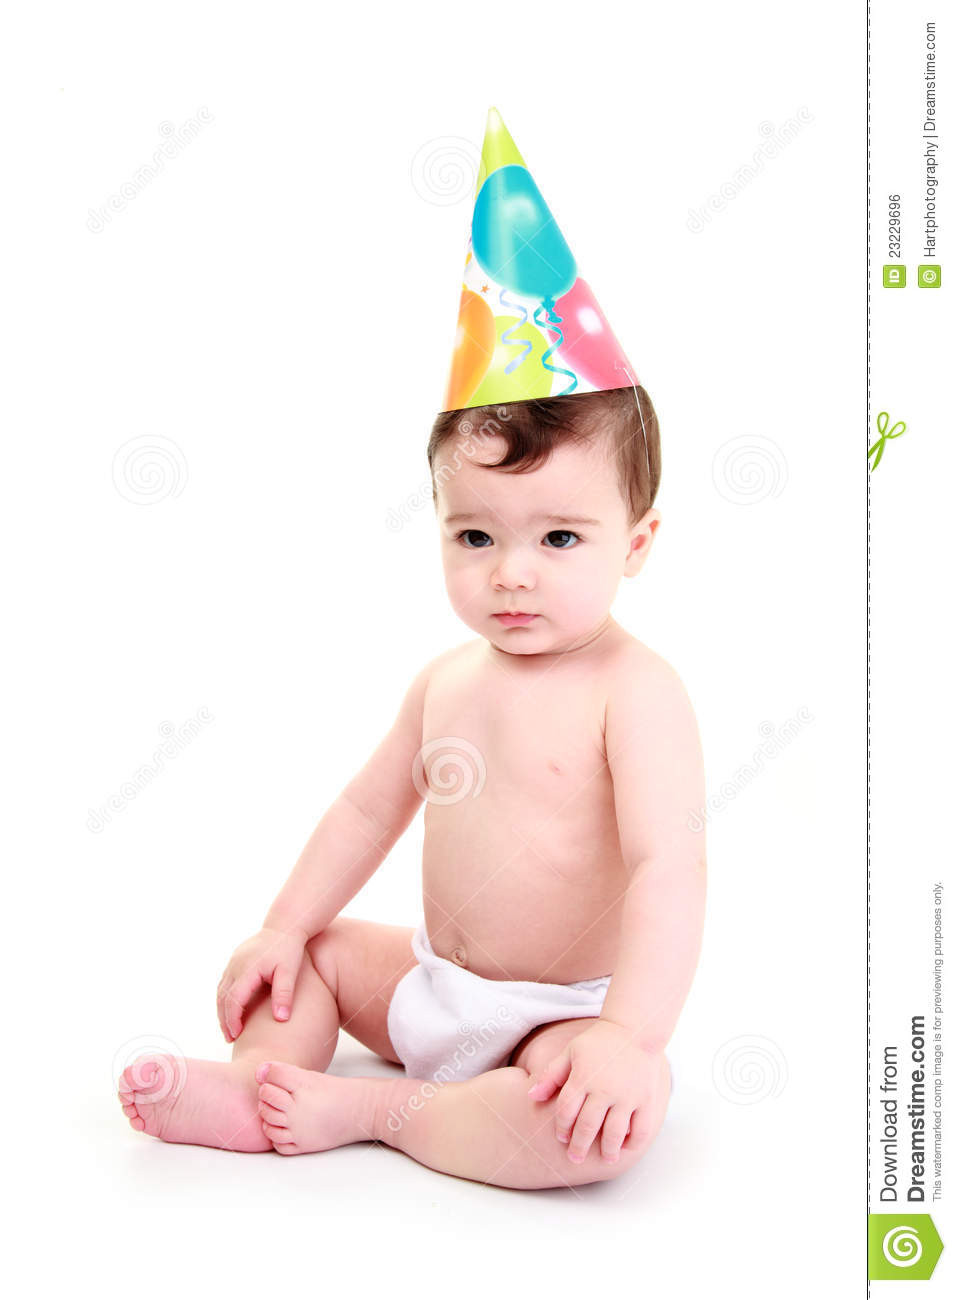 Baby Party Hat
 Baby wearing party hat stock photo Image of content